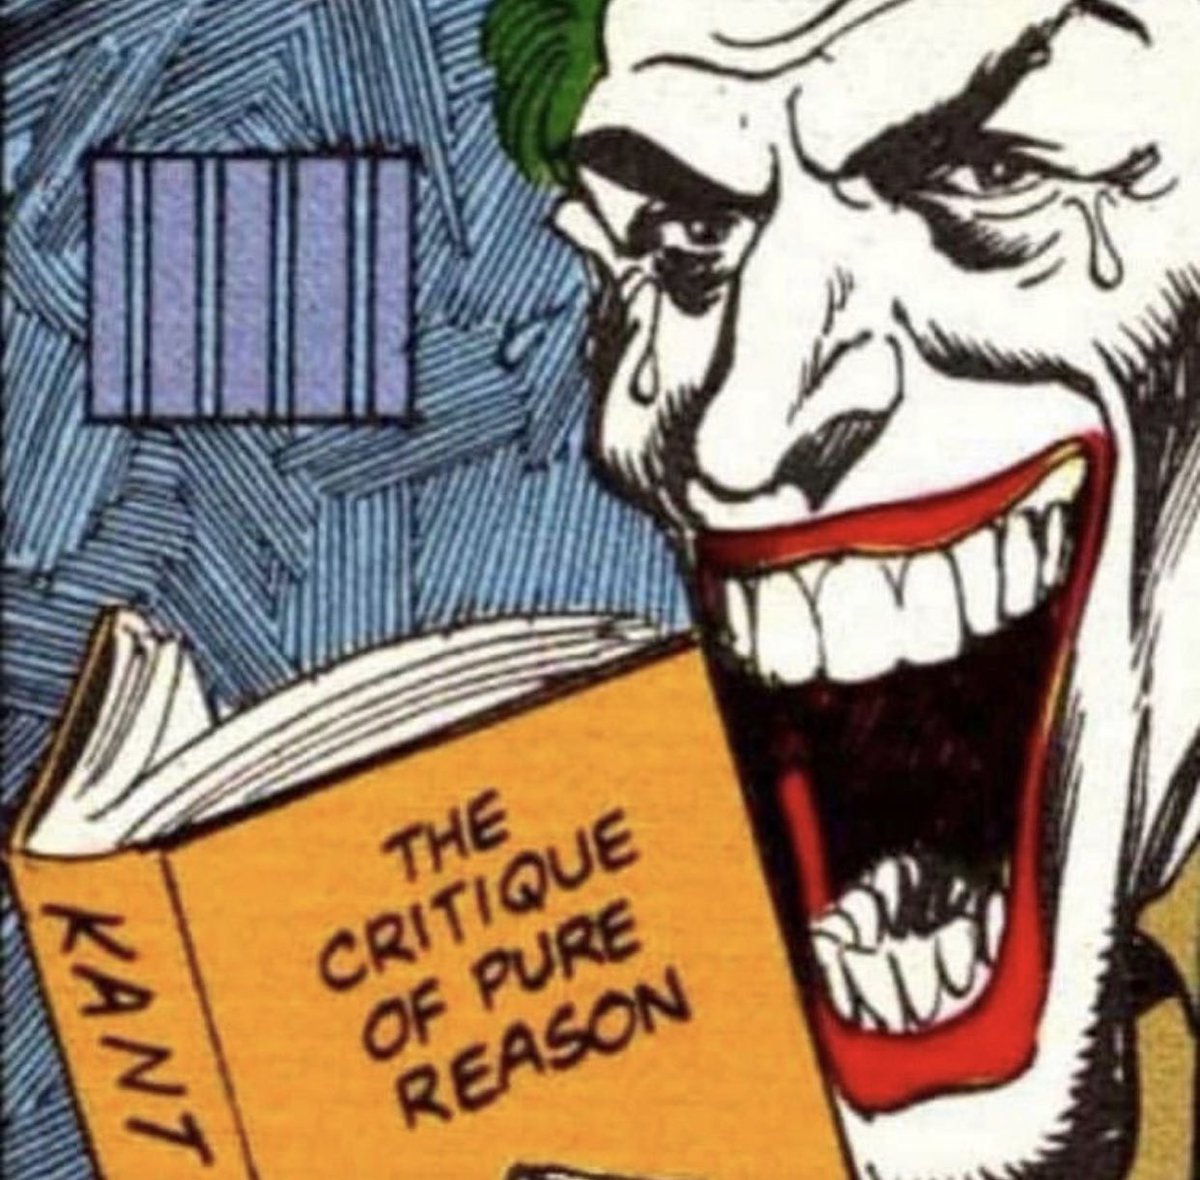 Sad guy with philosophy on X: Just found this & couldn't relate more to  Joker. https://t.co/RNDrren8WV / X